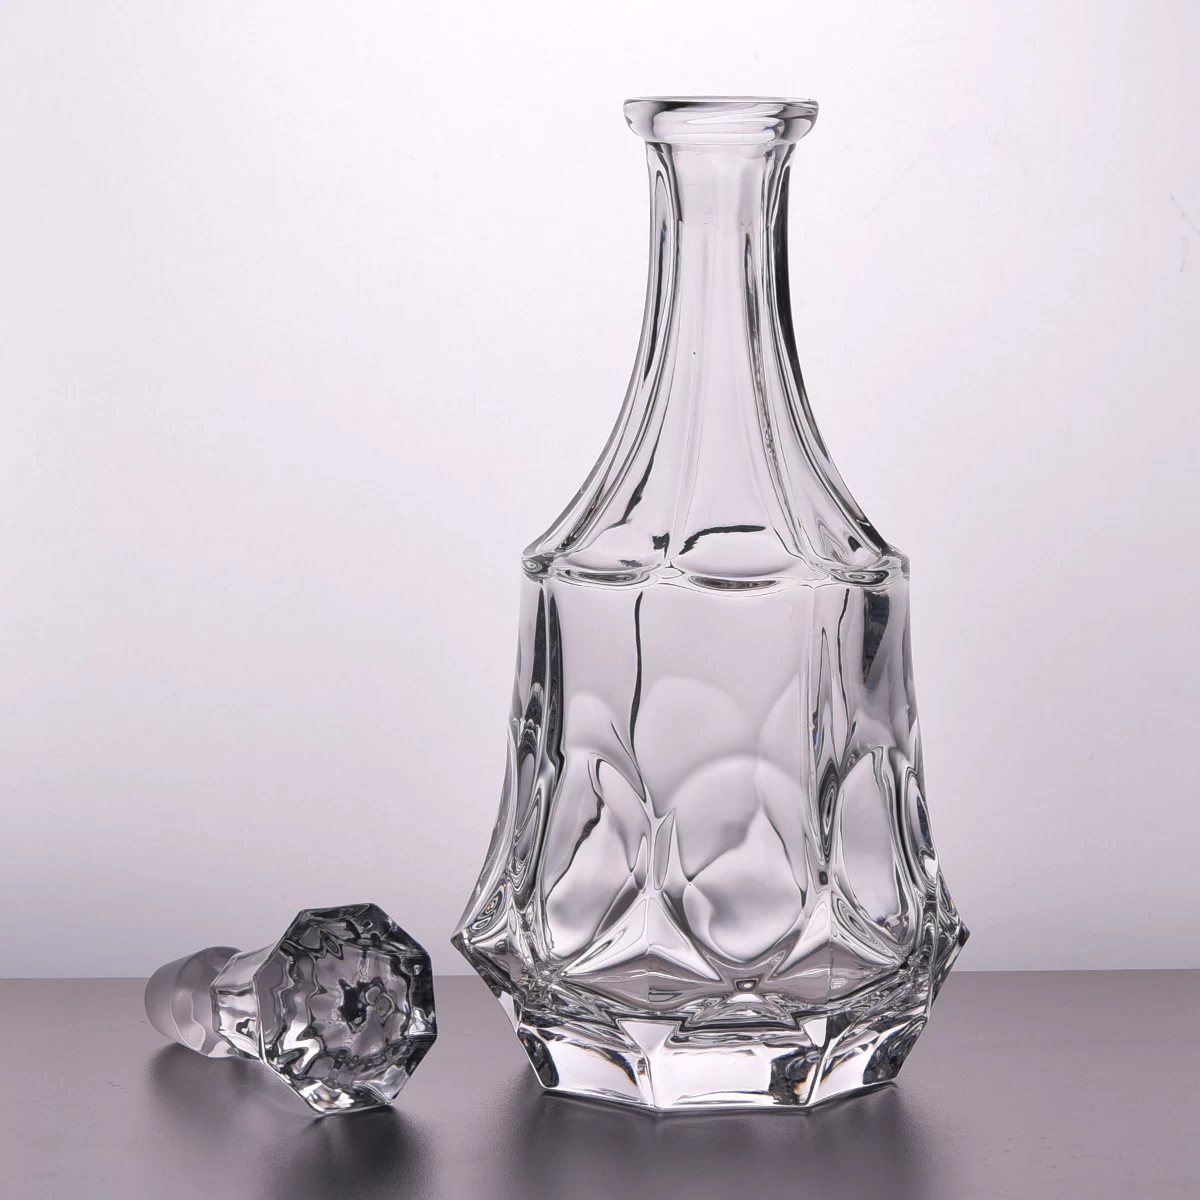 Hot Popular Crystal glass whiskey decanter sets